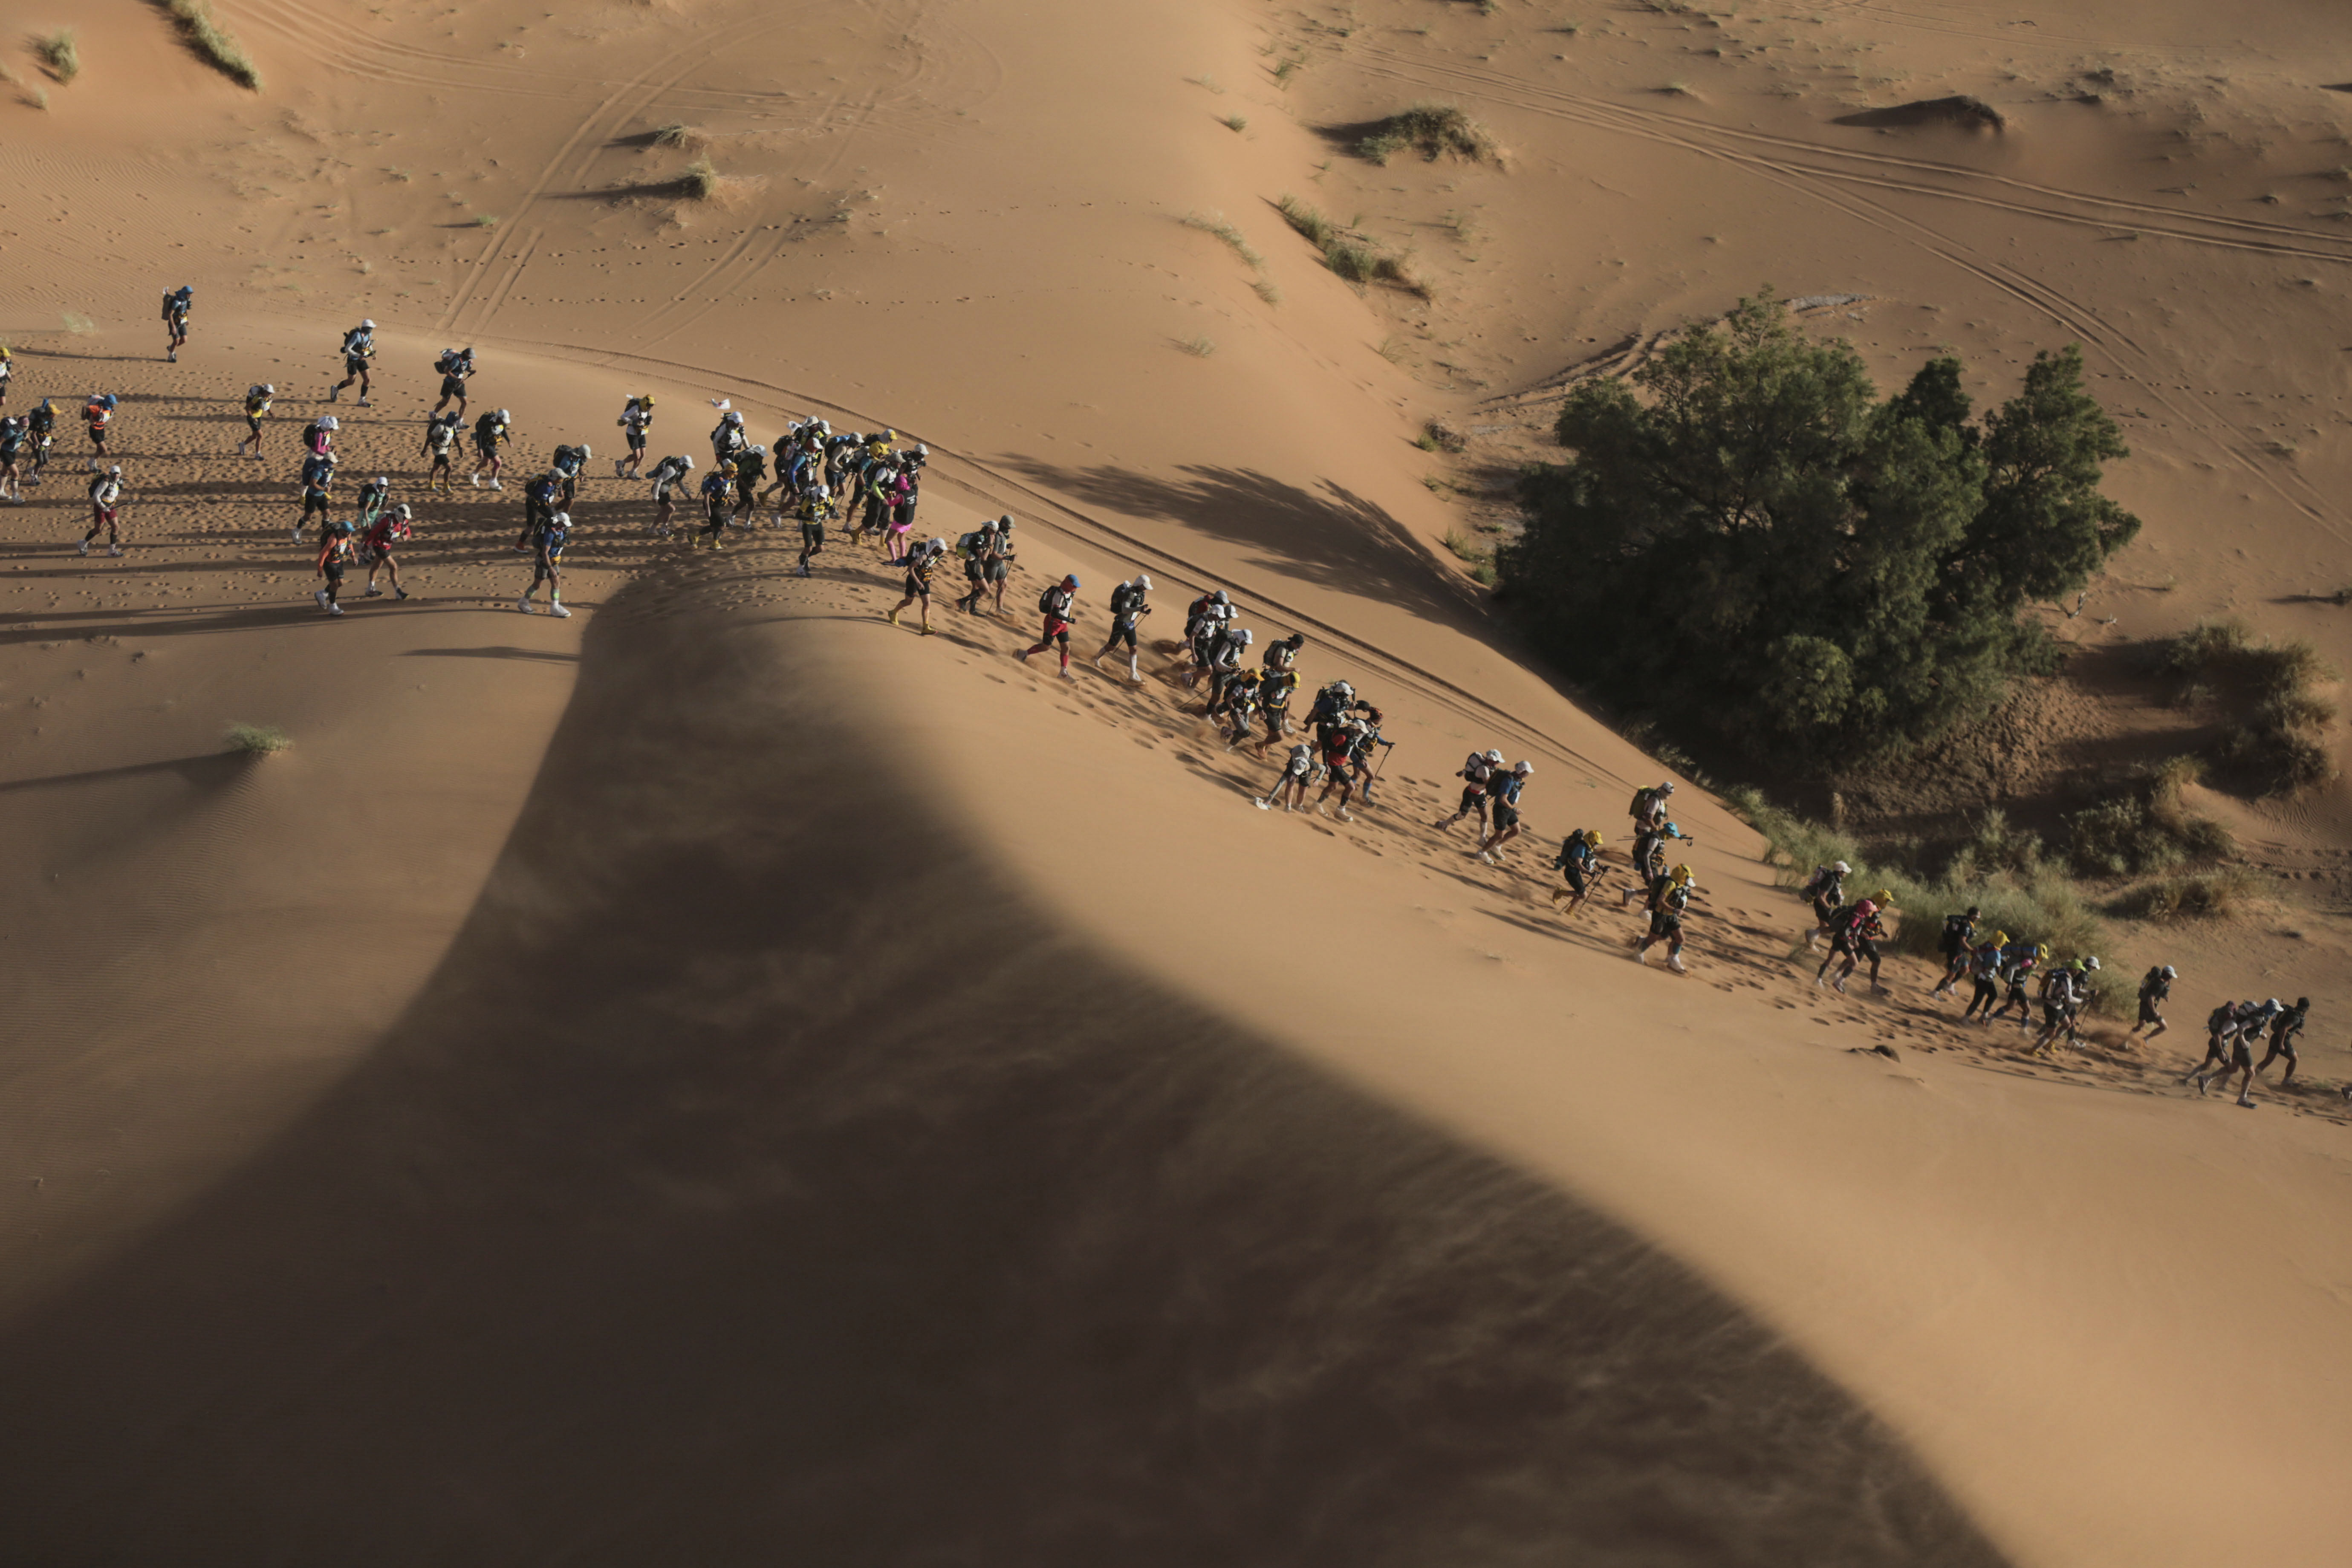 Competitors take part in stage 5 of the 33rd edition of Marathon des Sables, in the Sahara desert, near Merzouga, southern Morocco, Friday, April 13, 2018. The marathon, held every year in Morocco, is a 250-km ultra-trail that takes part over 6 stages in extremely grueling conditions. (AP Photo/Mosa'ab Elshamy)